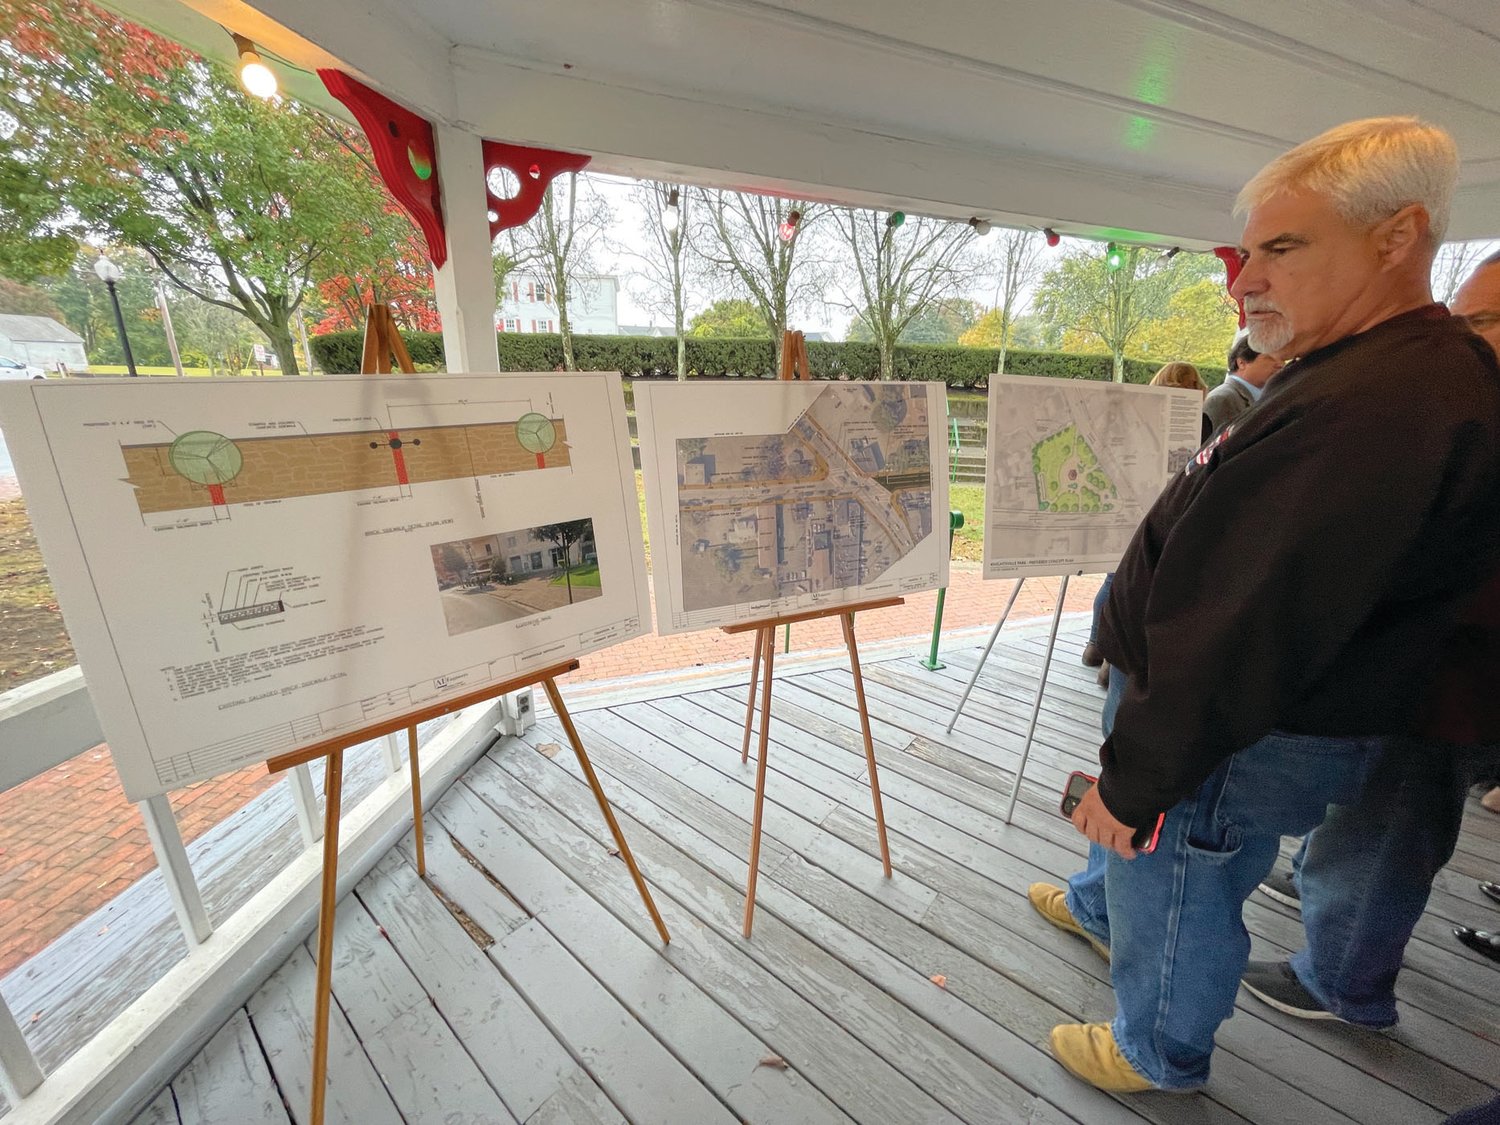 WHAT’S TO COME: During Monday’s gathering, three poster board displays were available to provide a glimpse of what’s planned as part of the Knightsville revitalization work.